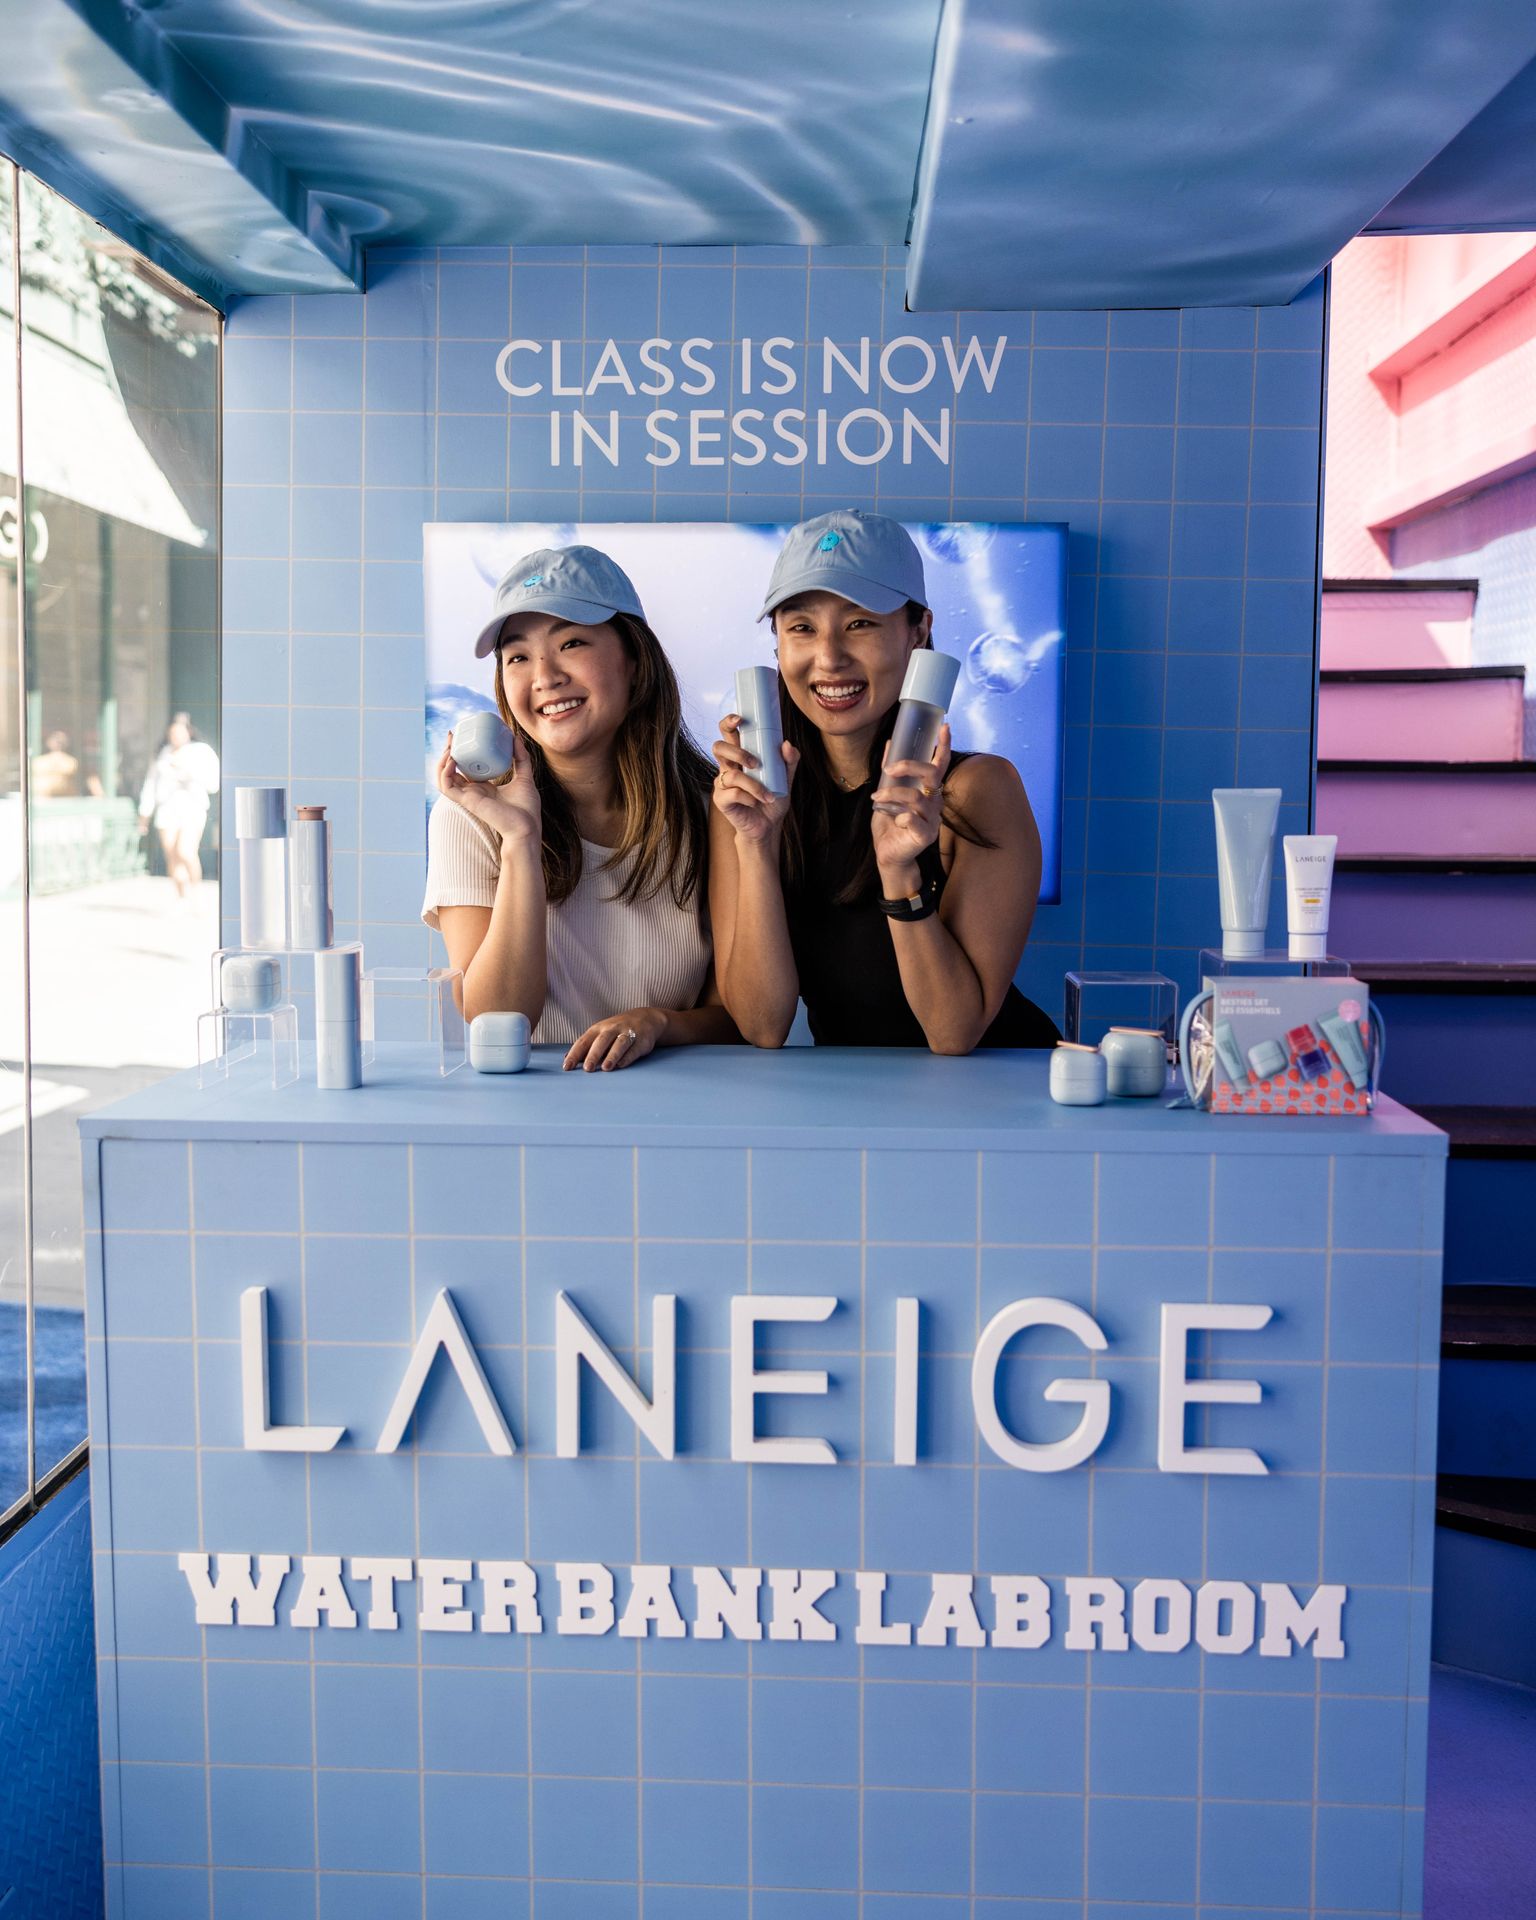 Laneige Water Bank Lab Room for Hydration School.